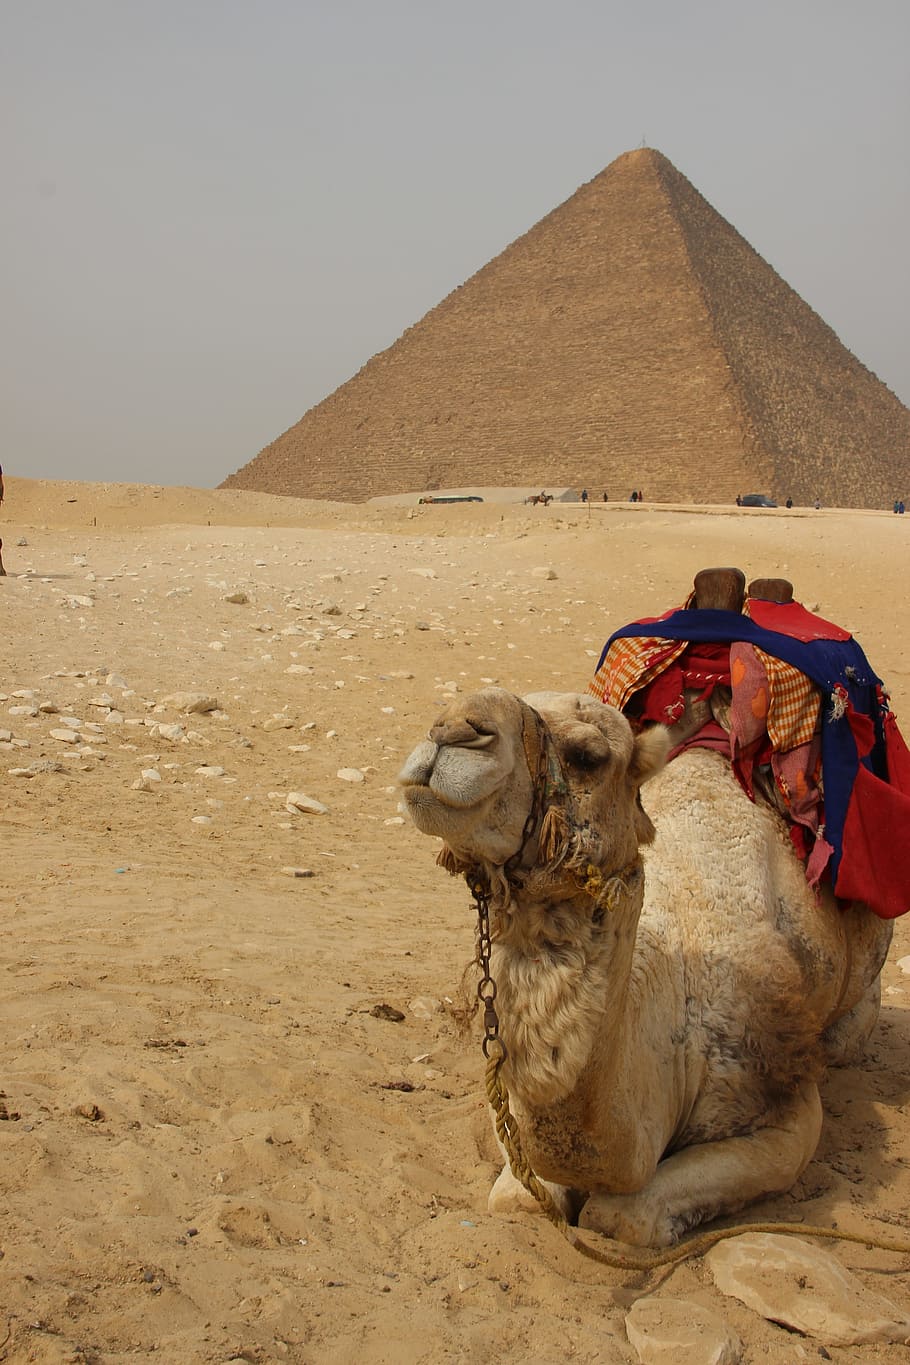 brown camel lying on the sand, Egypt, Africa, Pyramid, traveling